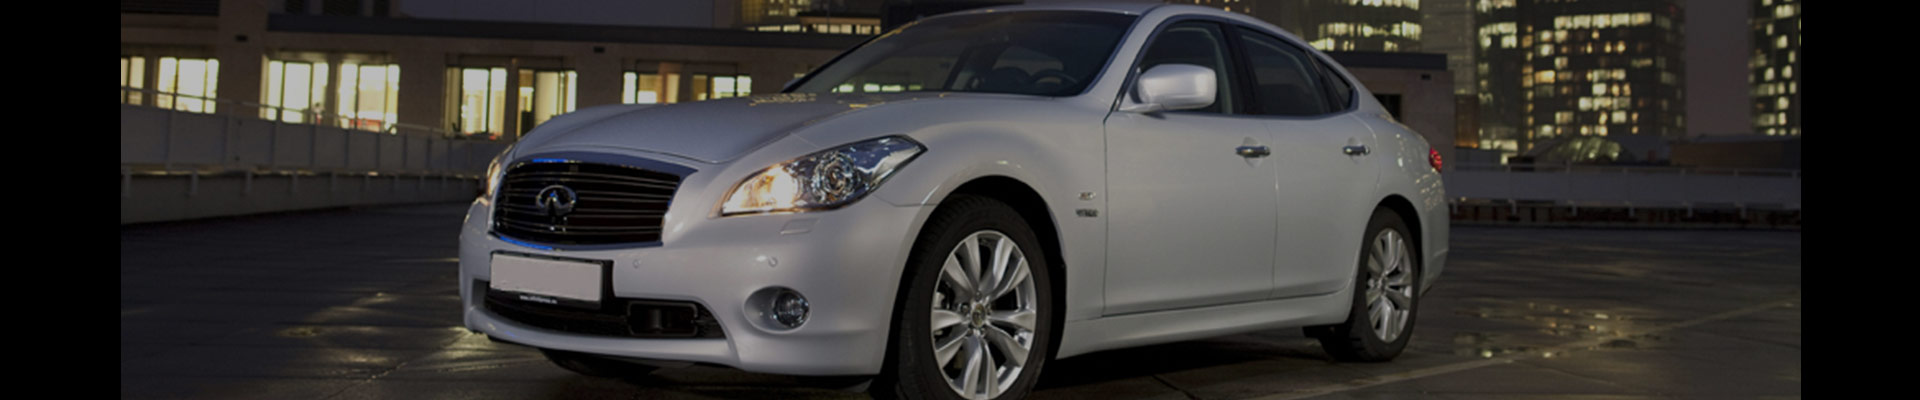 Shop Replacement and OEM 2012 Infiniti M35h Parts with Discounted Price on the Net